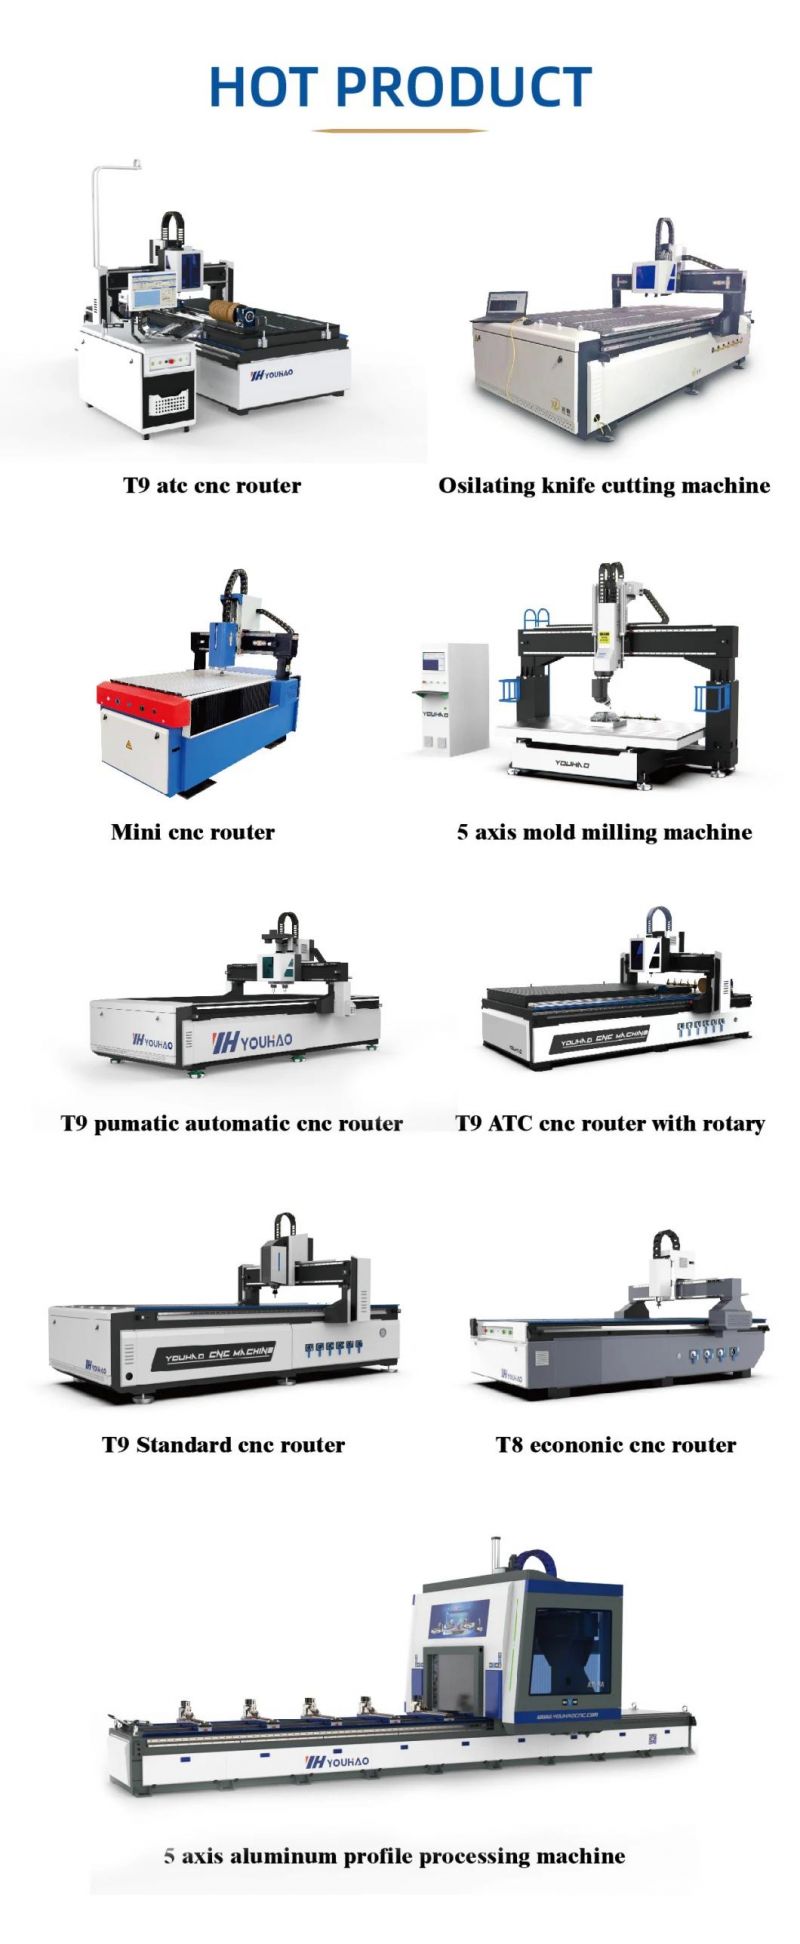 4 Axis CNC Routers 3D 4axis High Z Axis CNC Router Wood Carving Machine